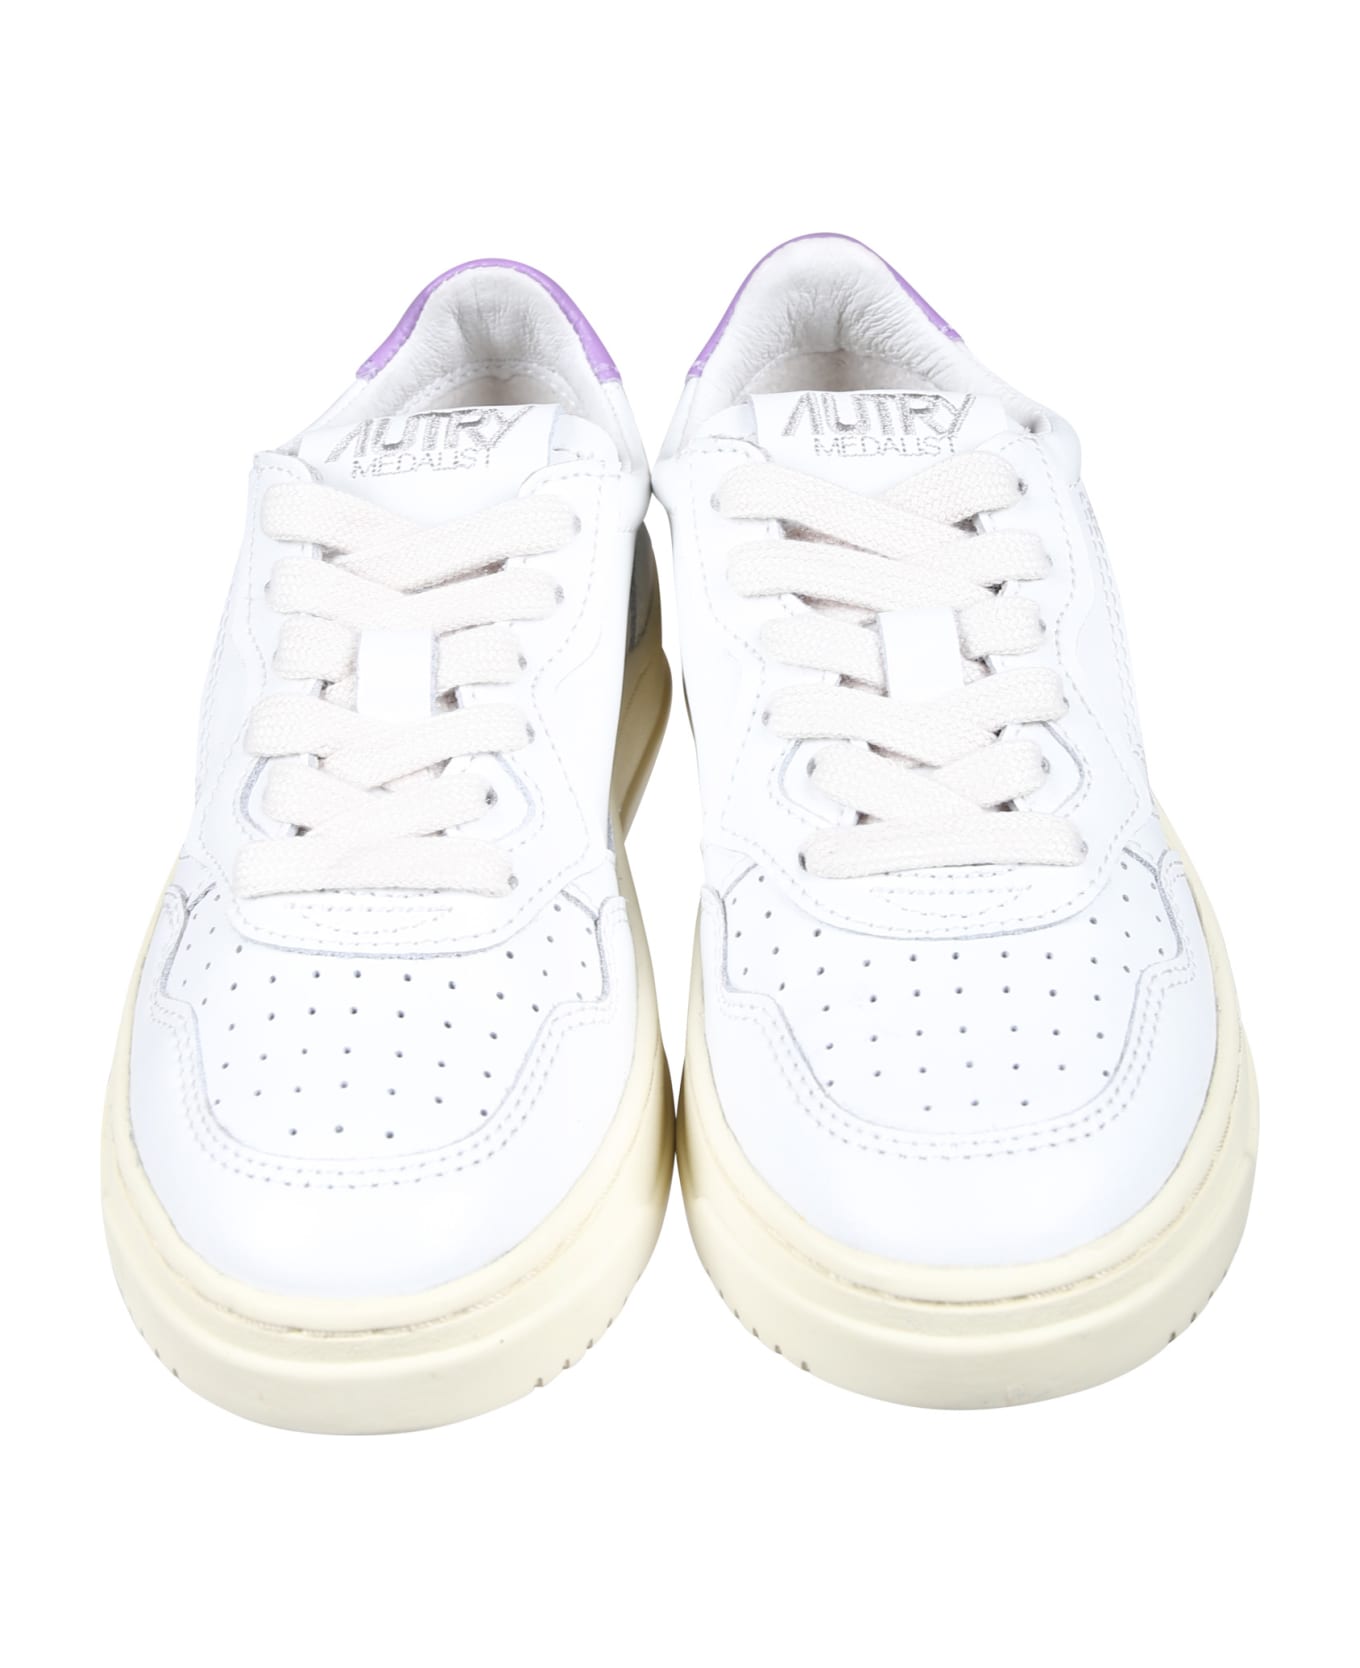 Autry Medalist Low Sneakers For Kids - Bianco シューズ